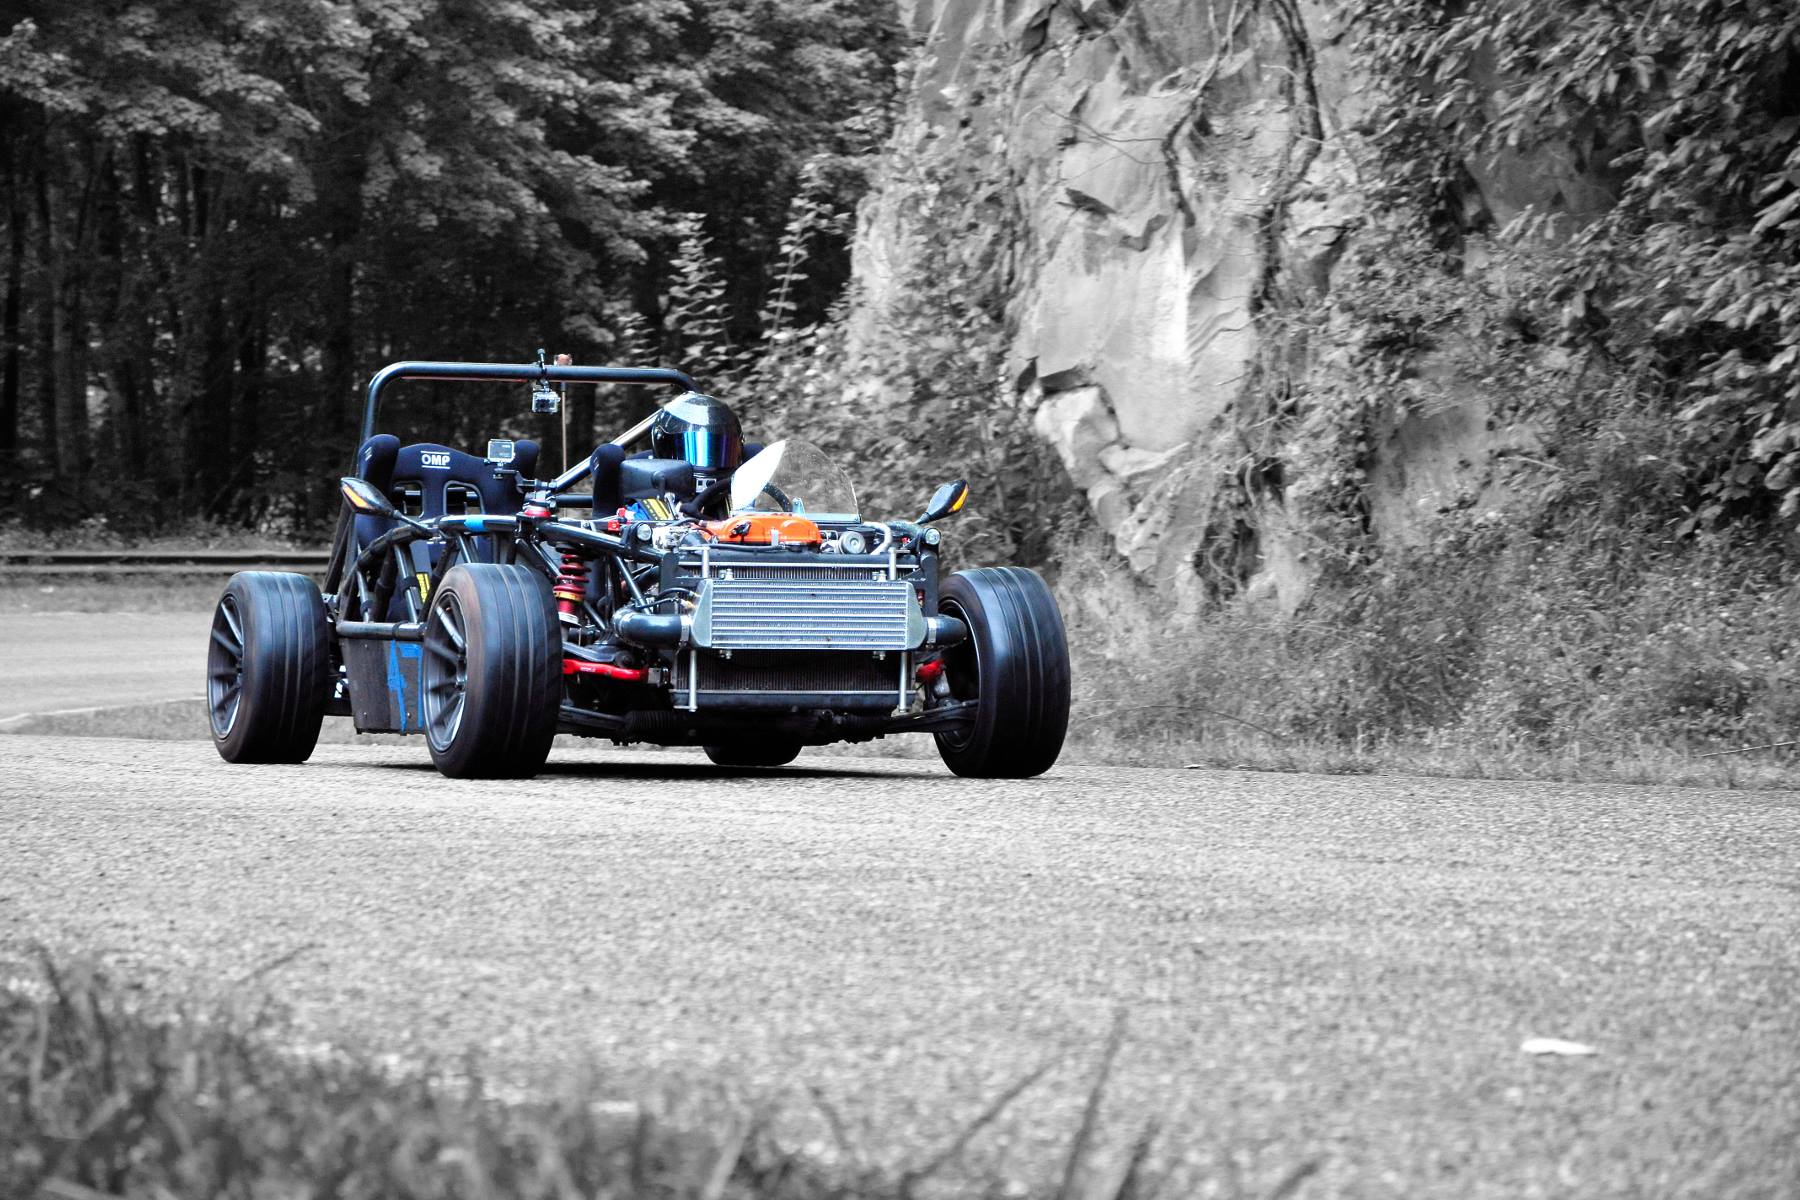 Cool shot of the Exocet